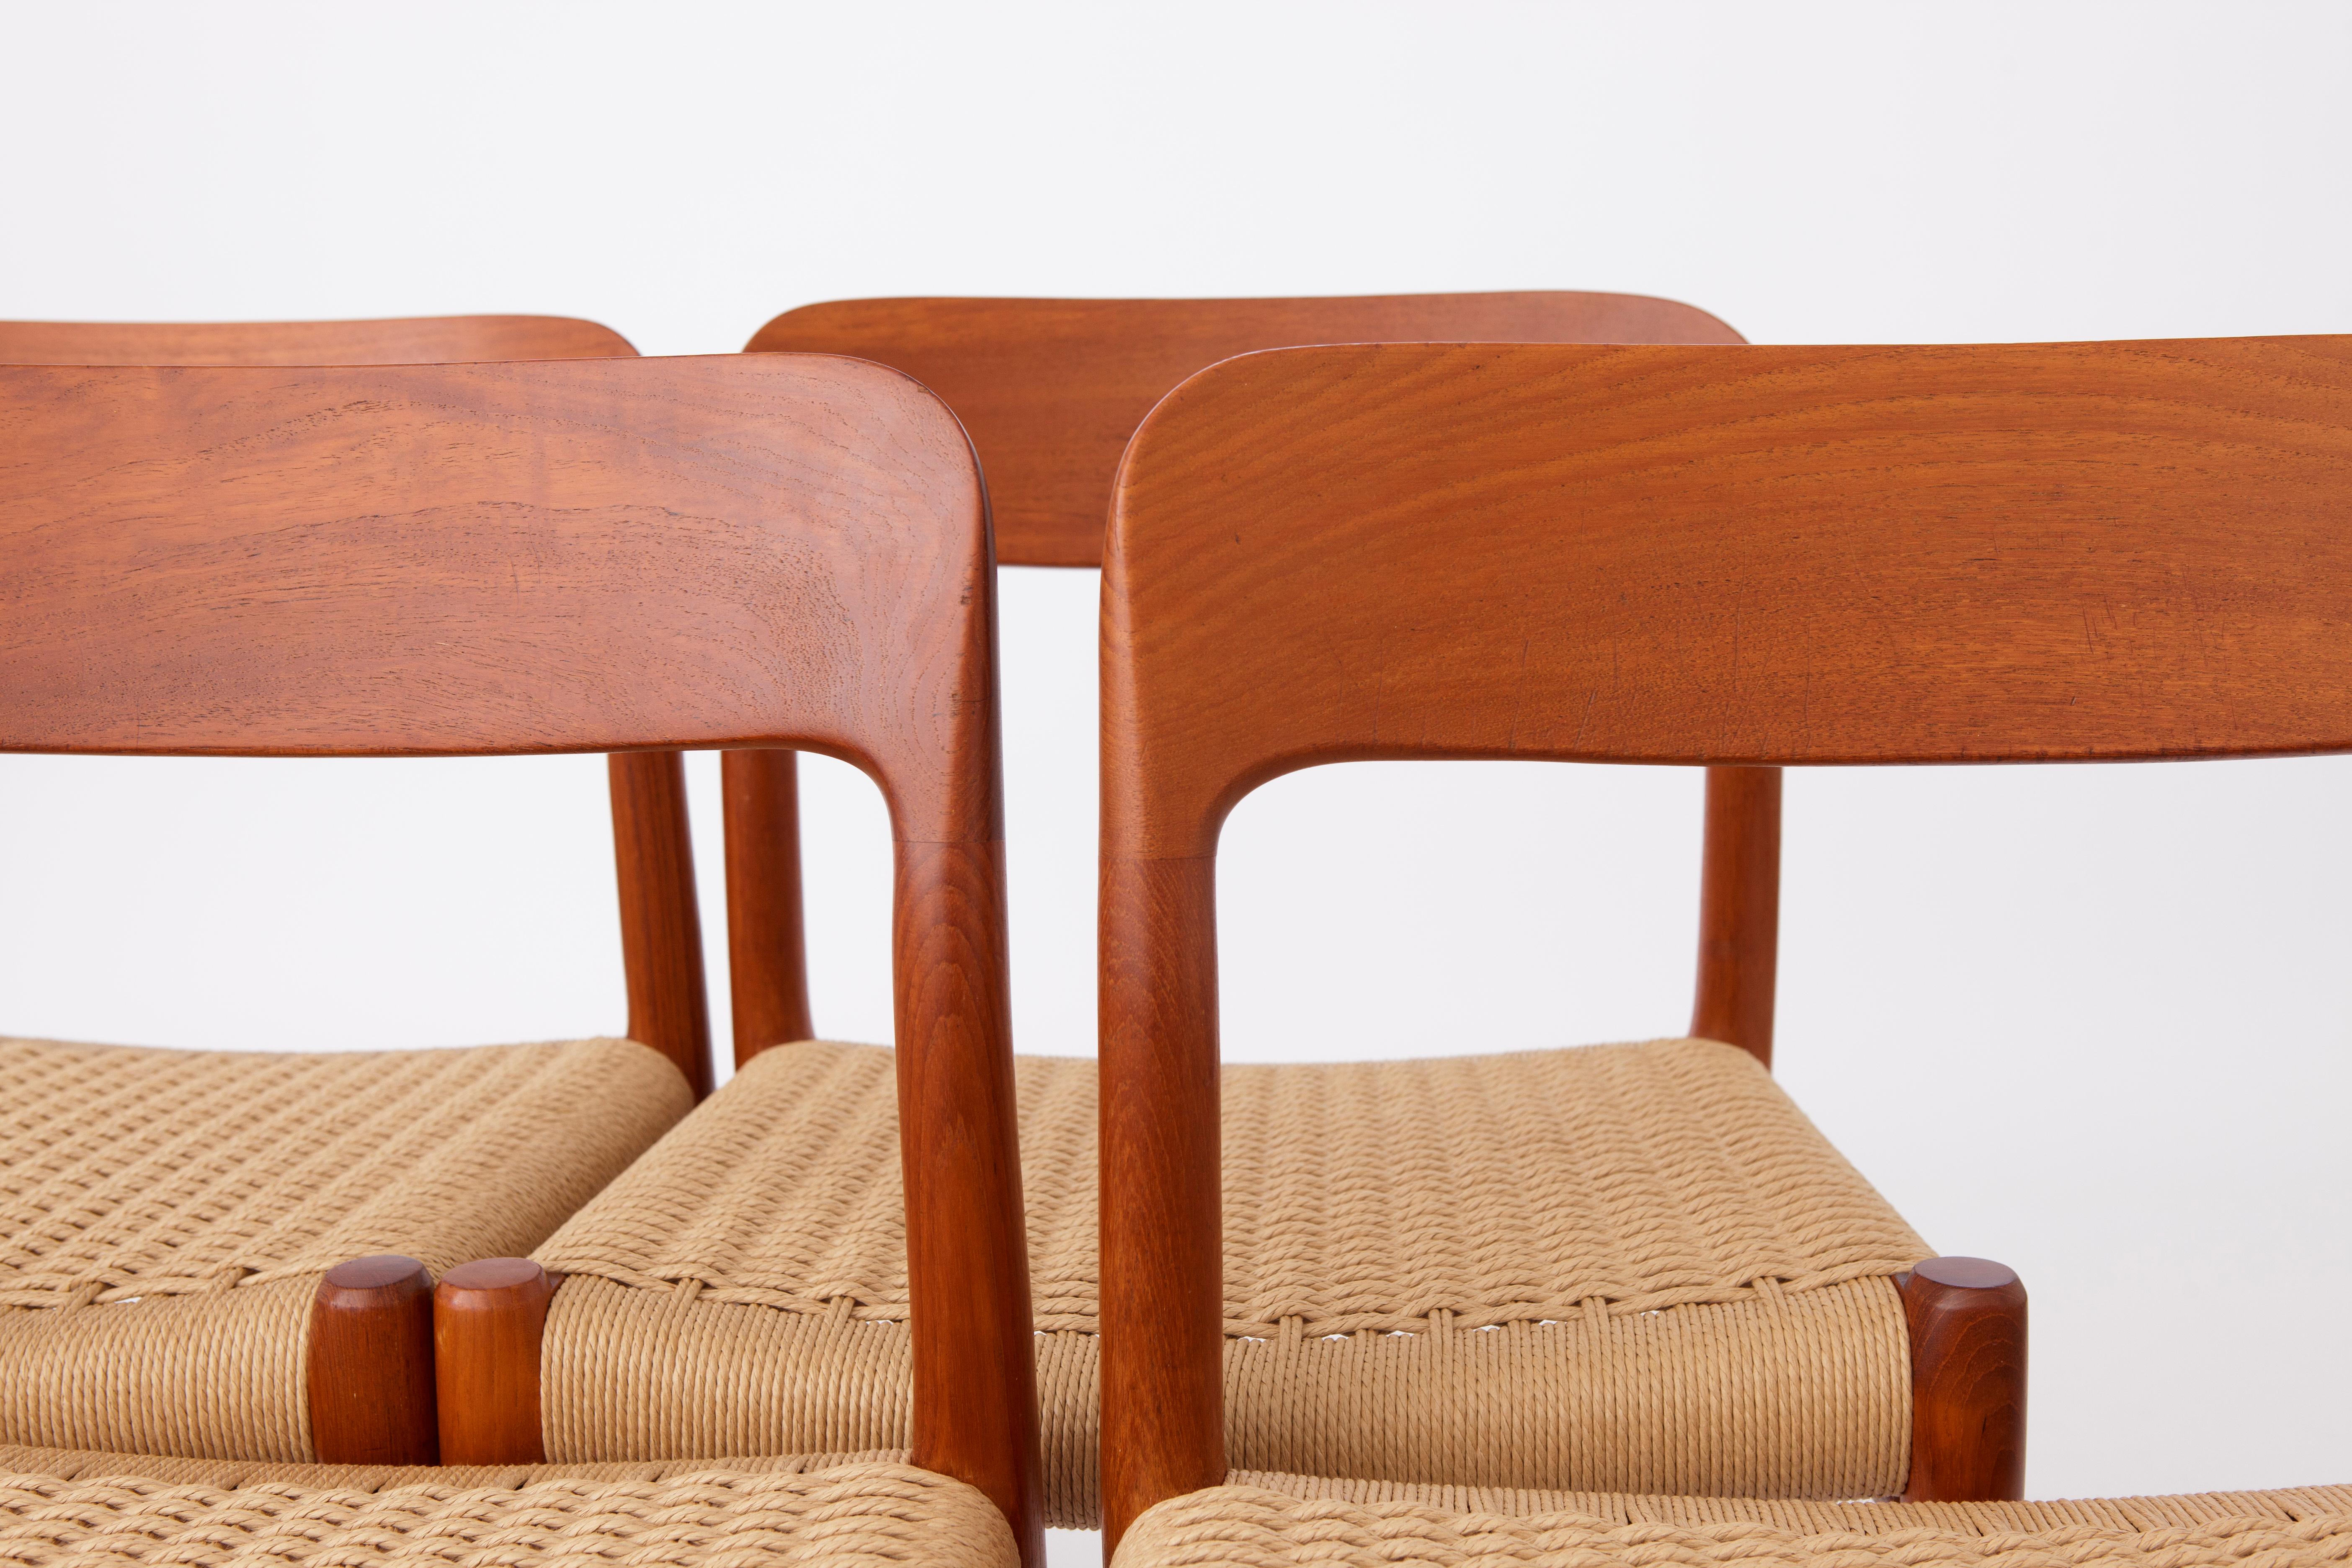 4 Niels Moller Midcentury Teak Dining Chairs with Papercord Seats, Danish In Excellent Condition For Sale In Hannover, DE